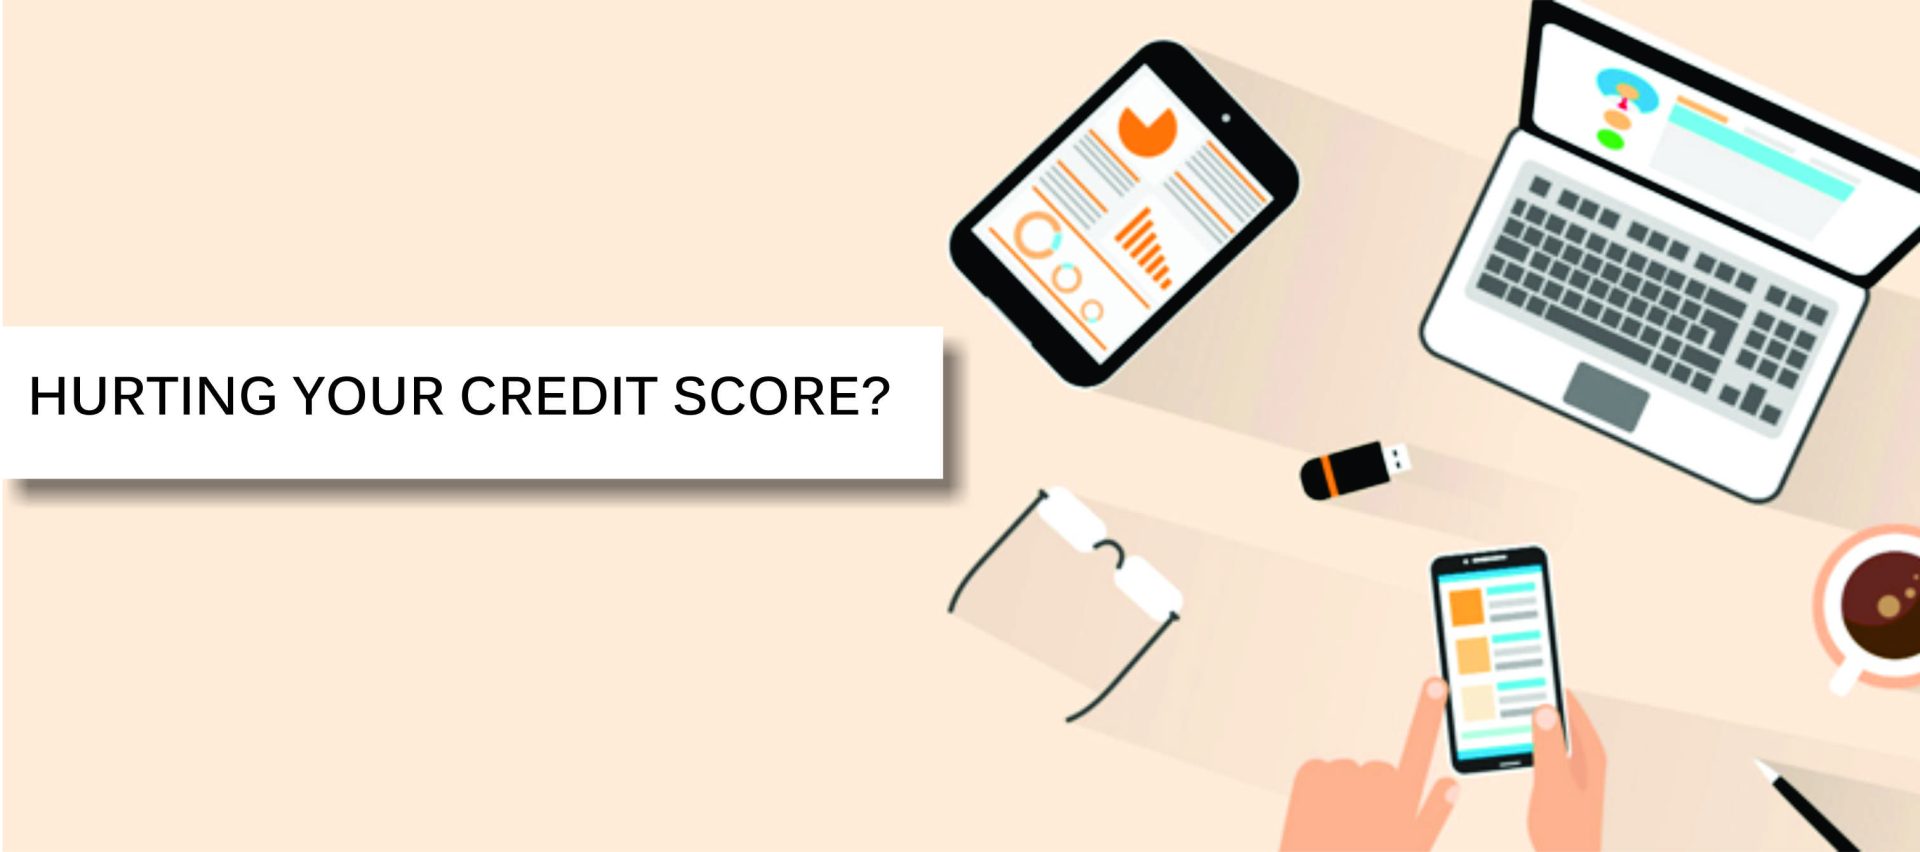 6 Things you may not know that are hurting your credit score